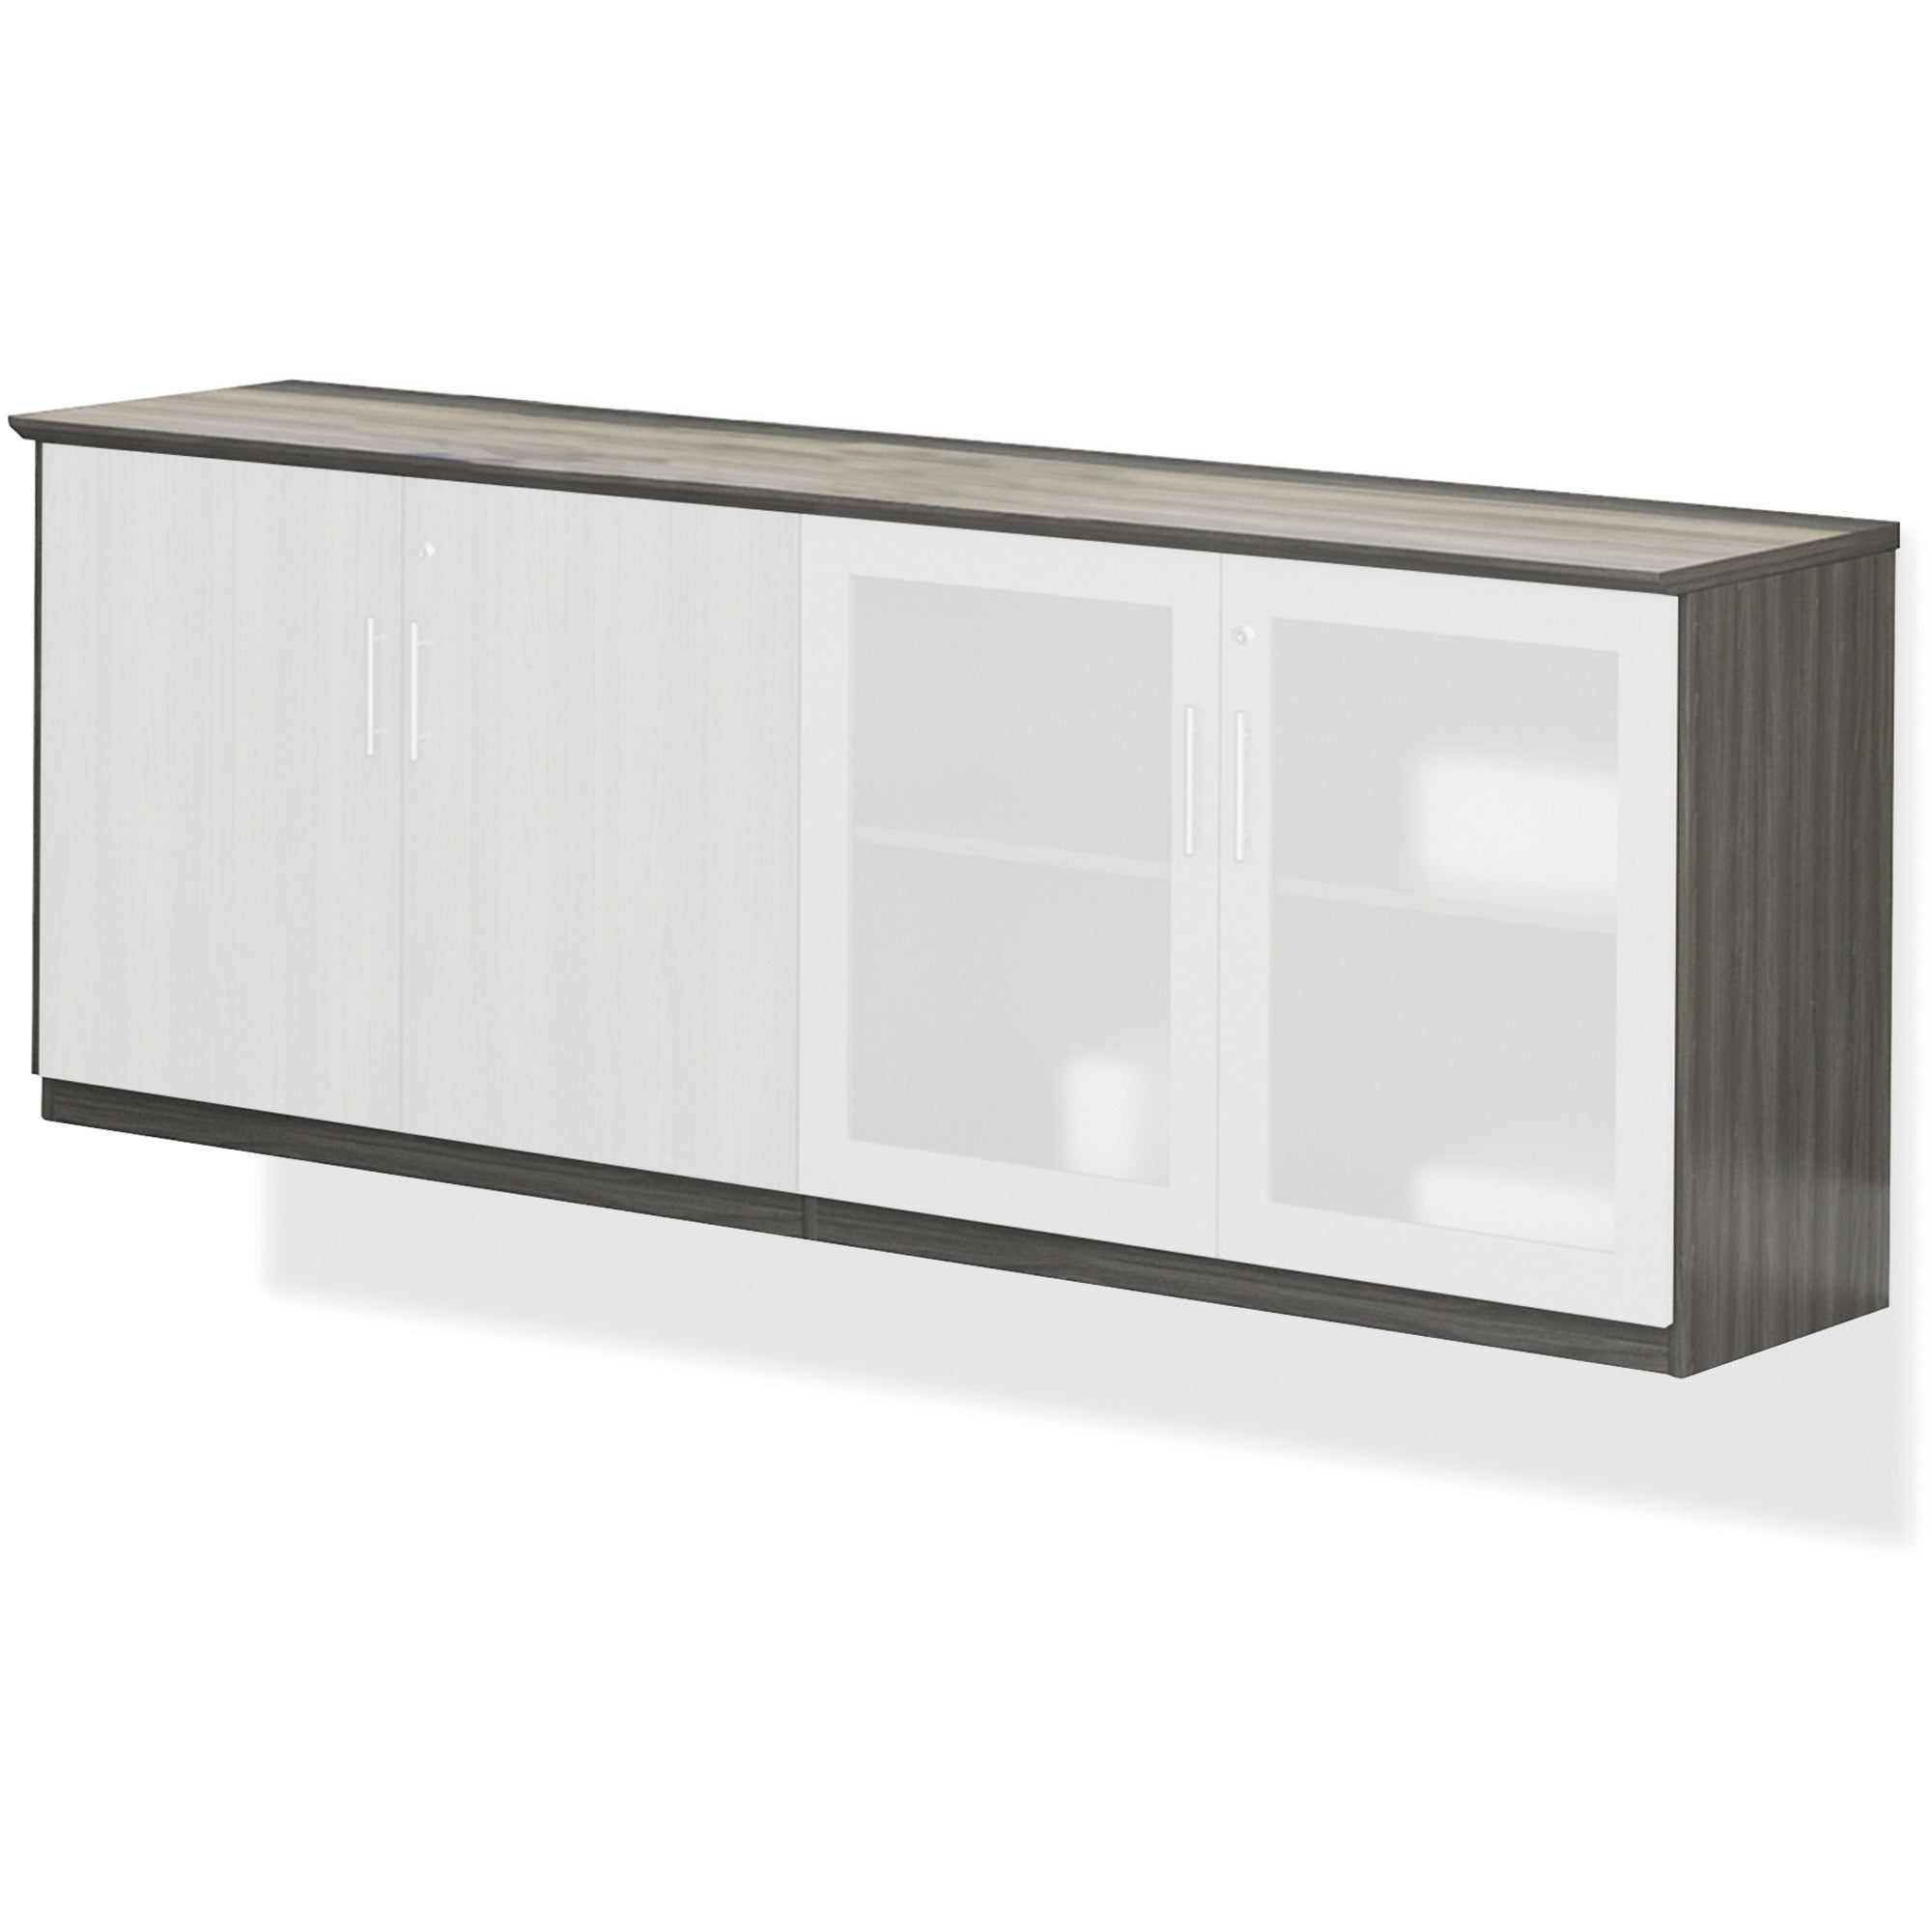 Mayline Medina Series Low Wall Cabinet - 72" x 20"29.5" , 1" Top - 2 Shelve(s) - 2 Adjustable Shelf(ves) - Beveled Edge - Material: Steel - Finish: Gray, Laminate - Wall Mountable, Stain Resistant, Water Resistant, Abrasion Resistant, Leveling Glide - 